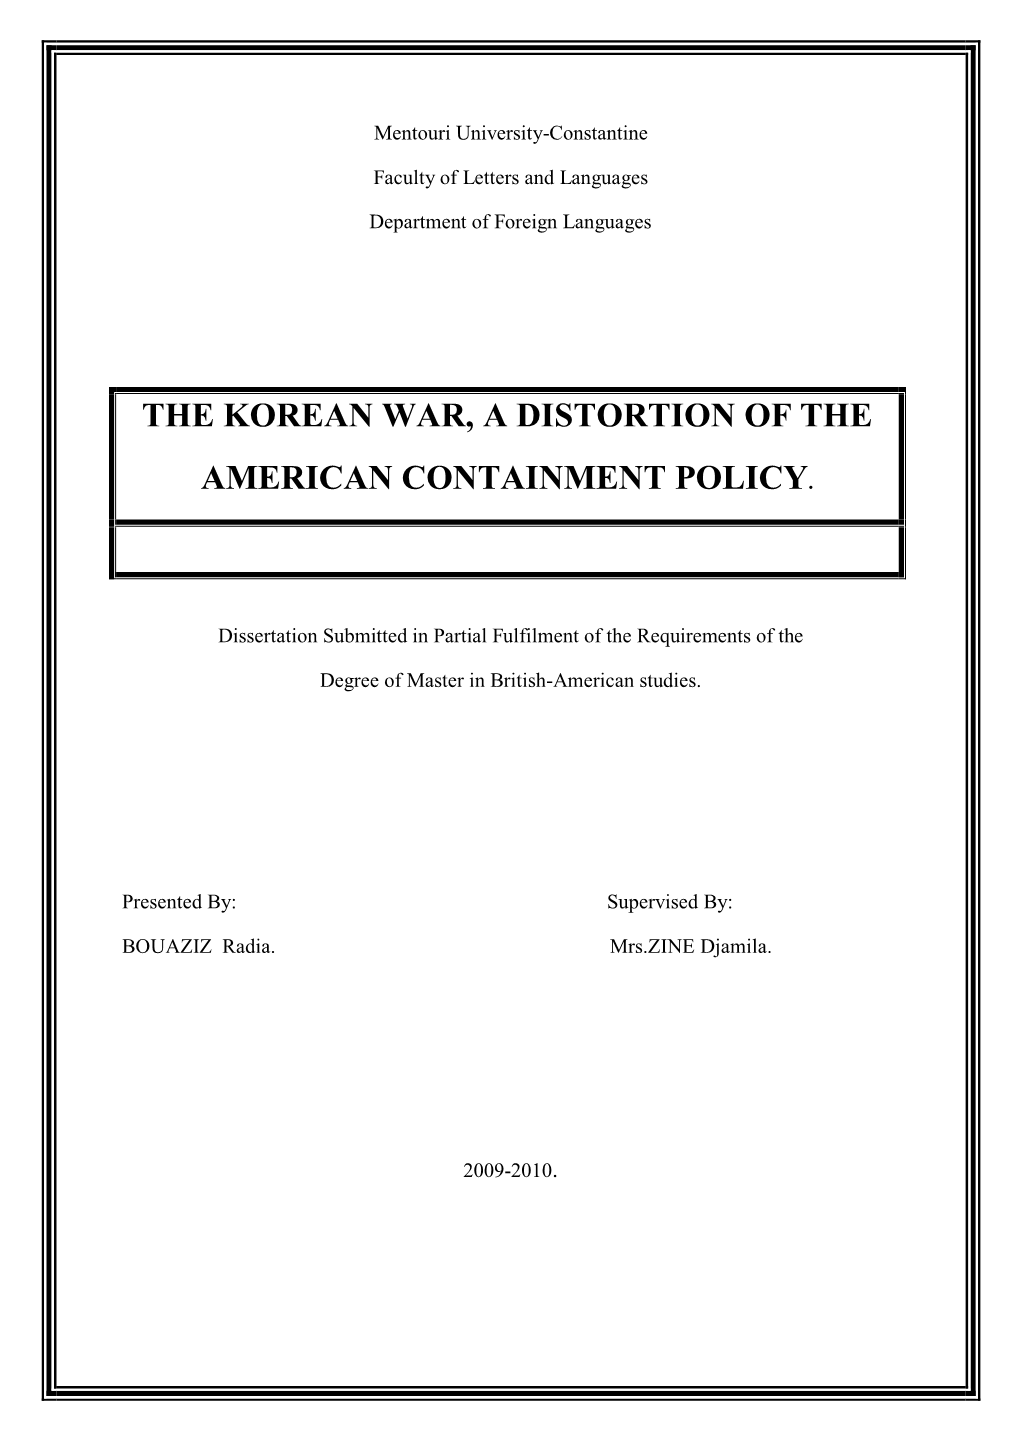 The Korean War, a Distortion of the American